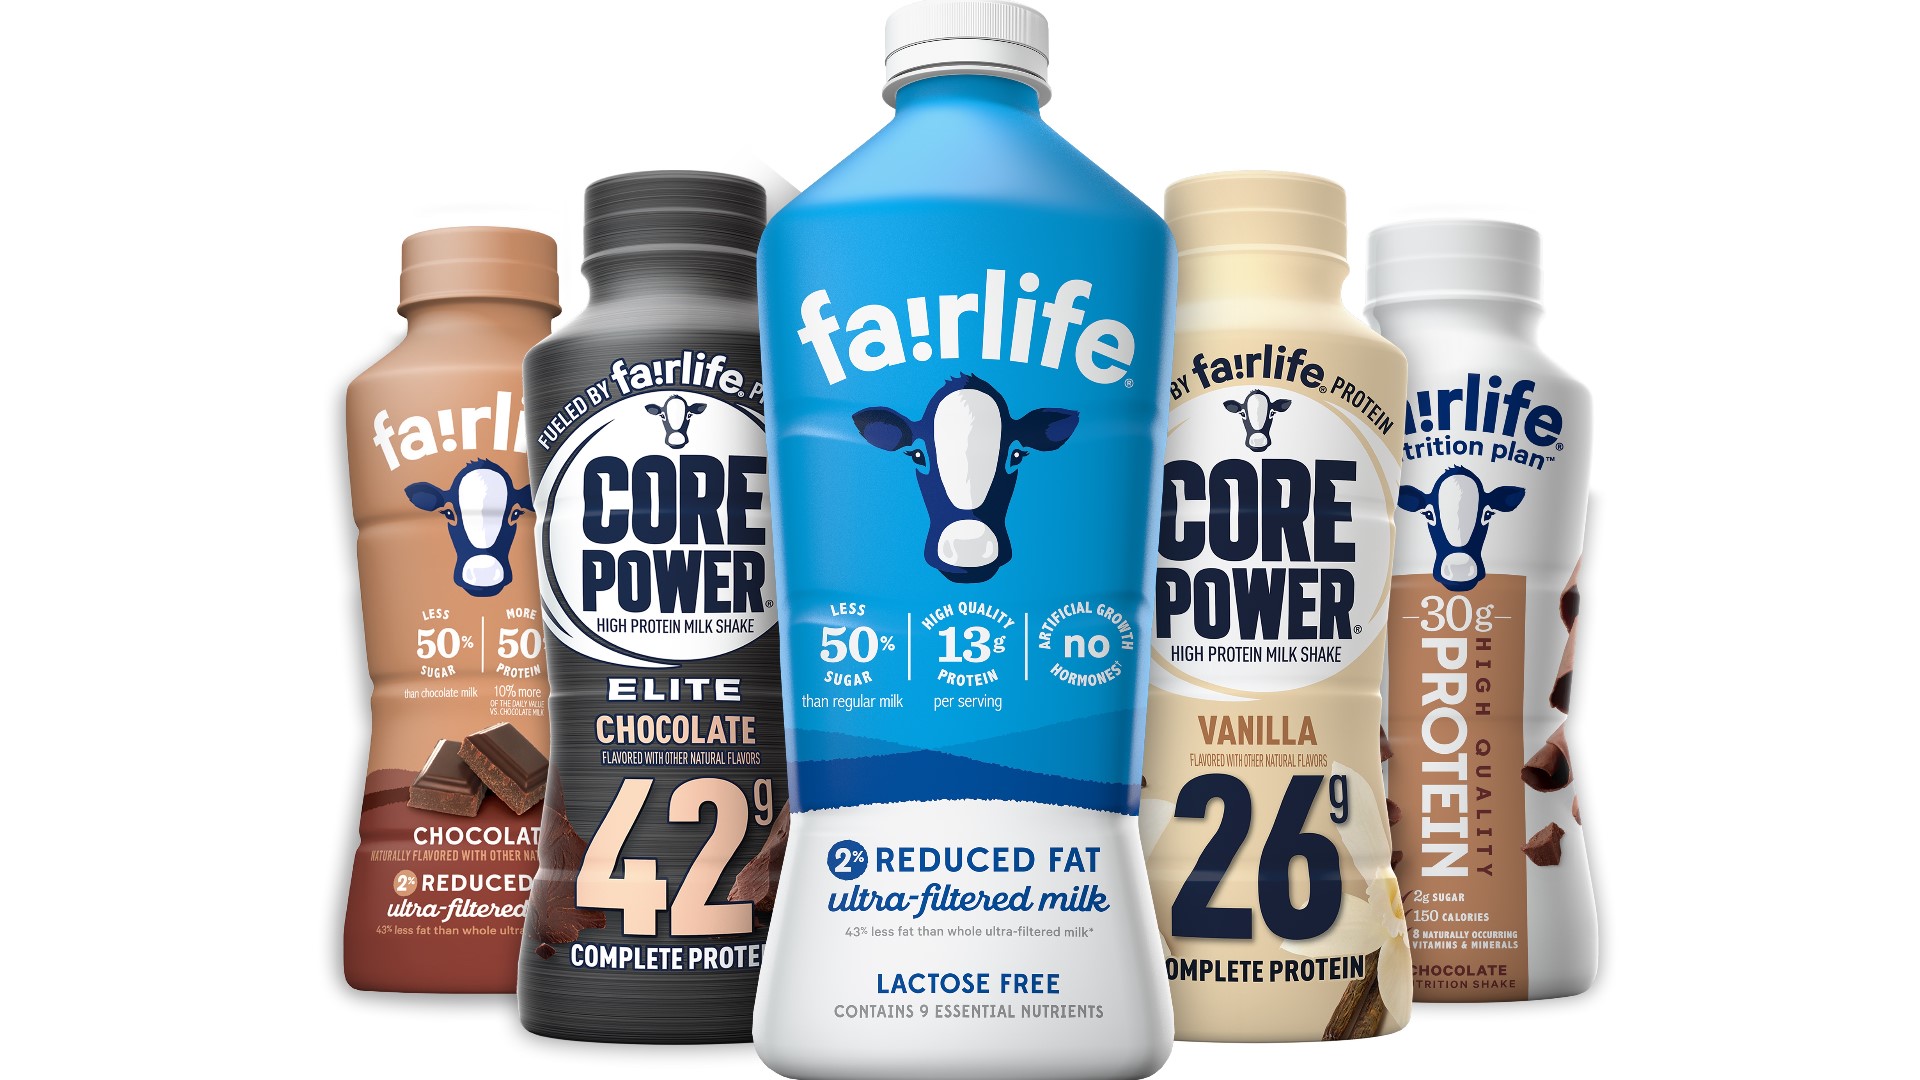 ​A new fairlife production facility broke ground in the Western New York town of Webster, New York.